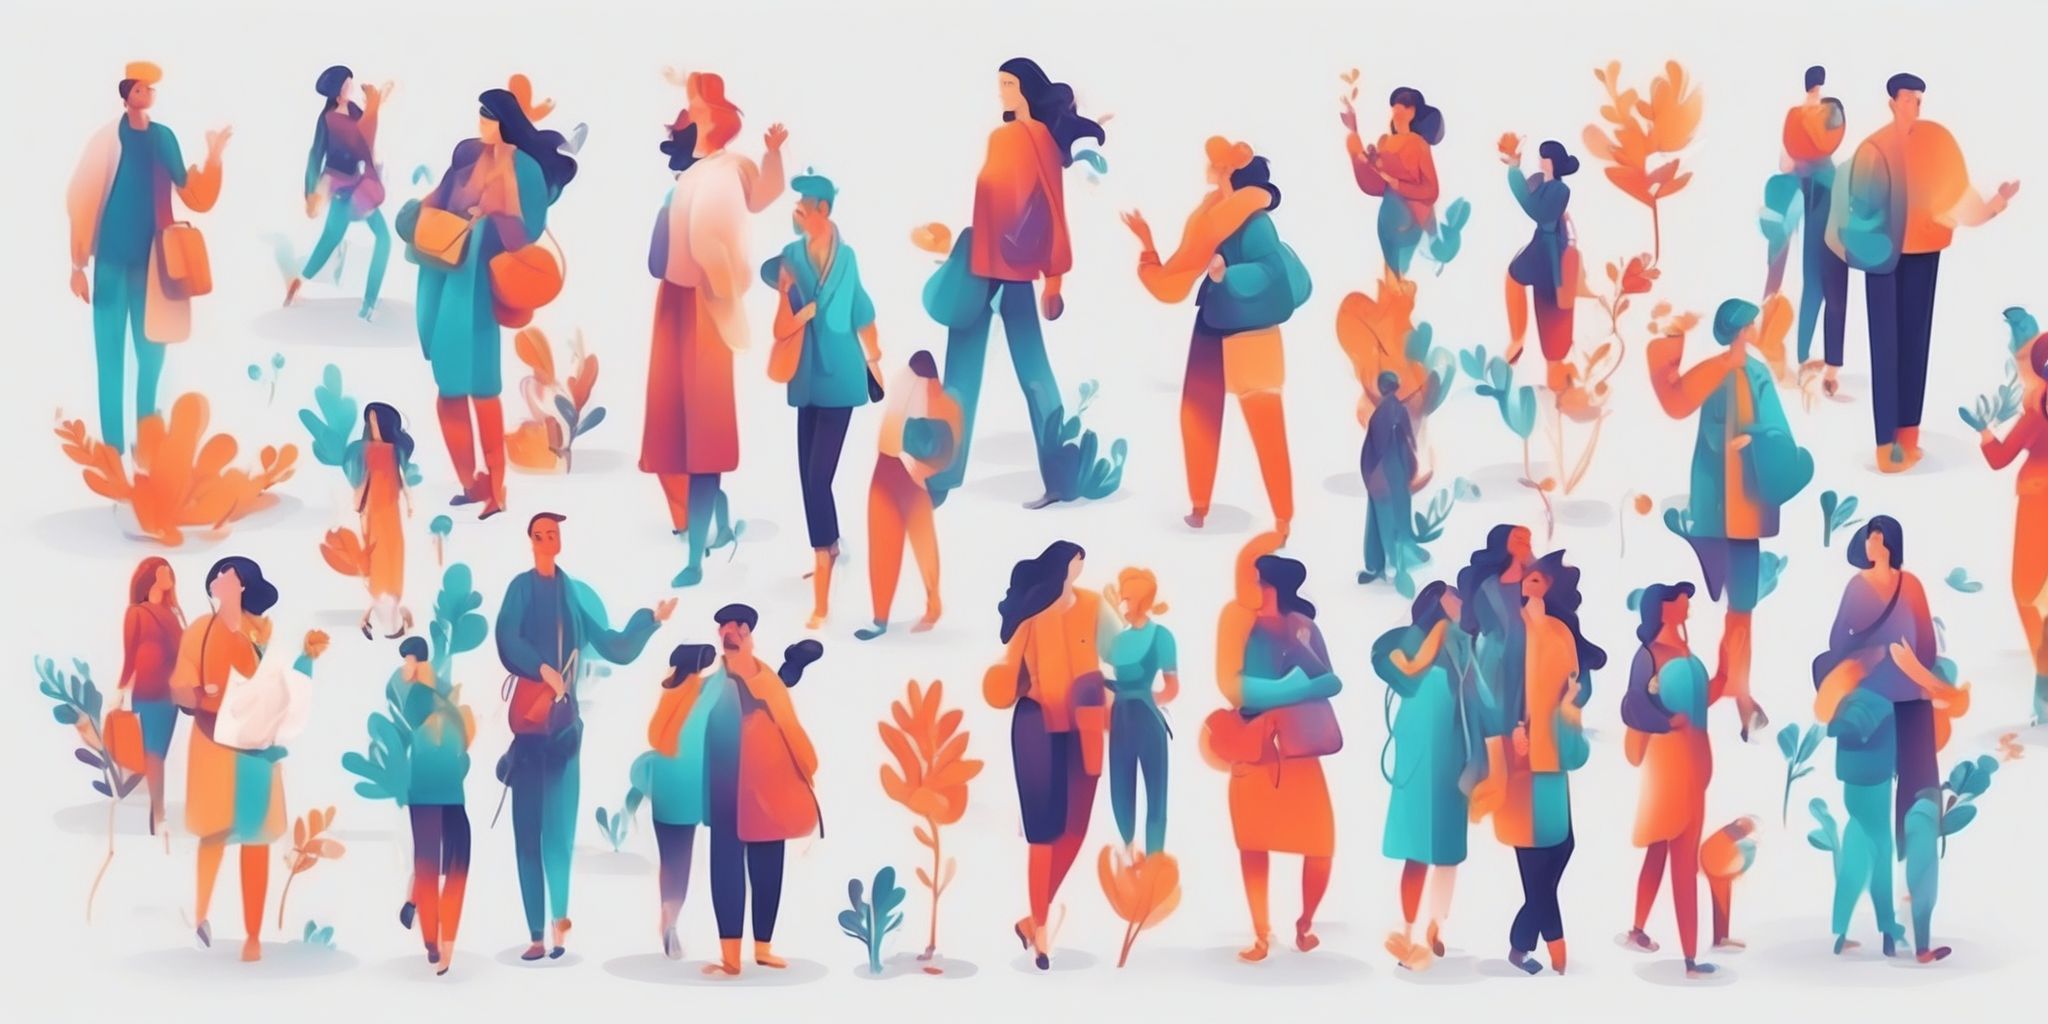 Followers in illustration style with gradients and white background